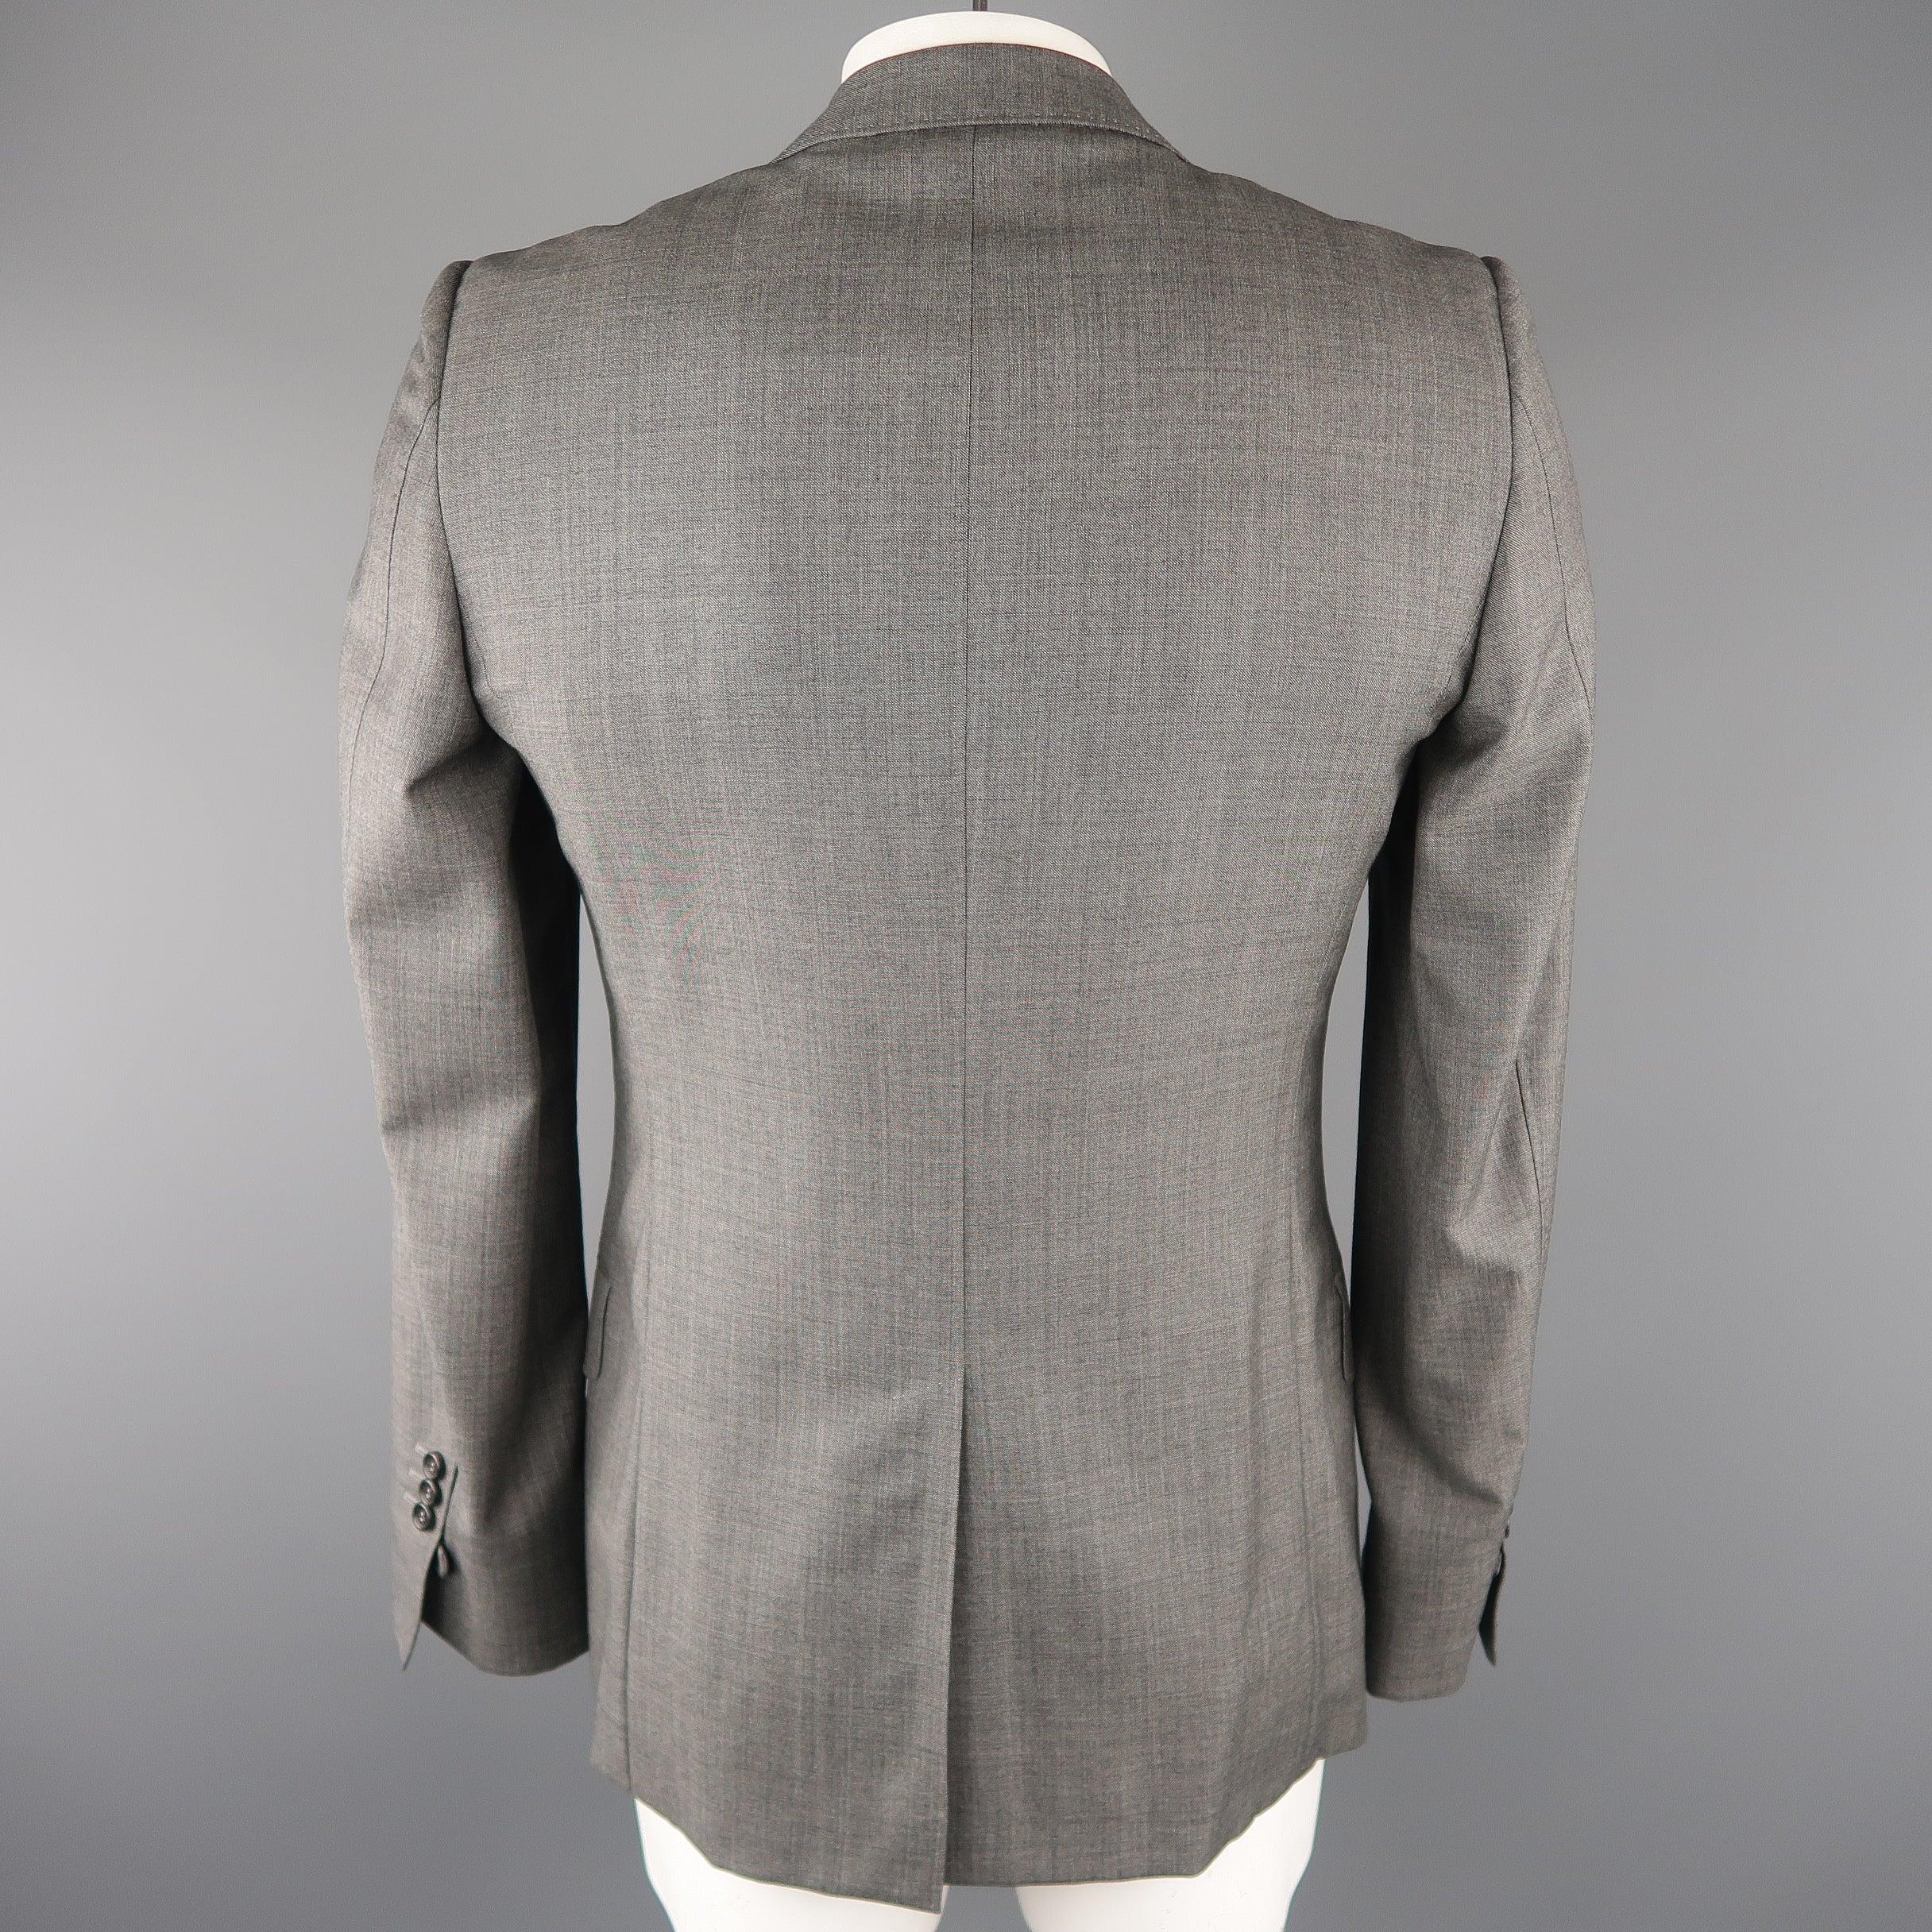 YVES SAINT LAURENT sport coat come in gray wool featuring a notch lapel, slit pockets, and a two buttons closure. Made in Switzerland.
Excellent Pre-Owned Condition. 

Marked:   48 R 

Measurements: 
 
Shoulder: 16
 inches  Chest: 42
 inches 